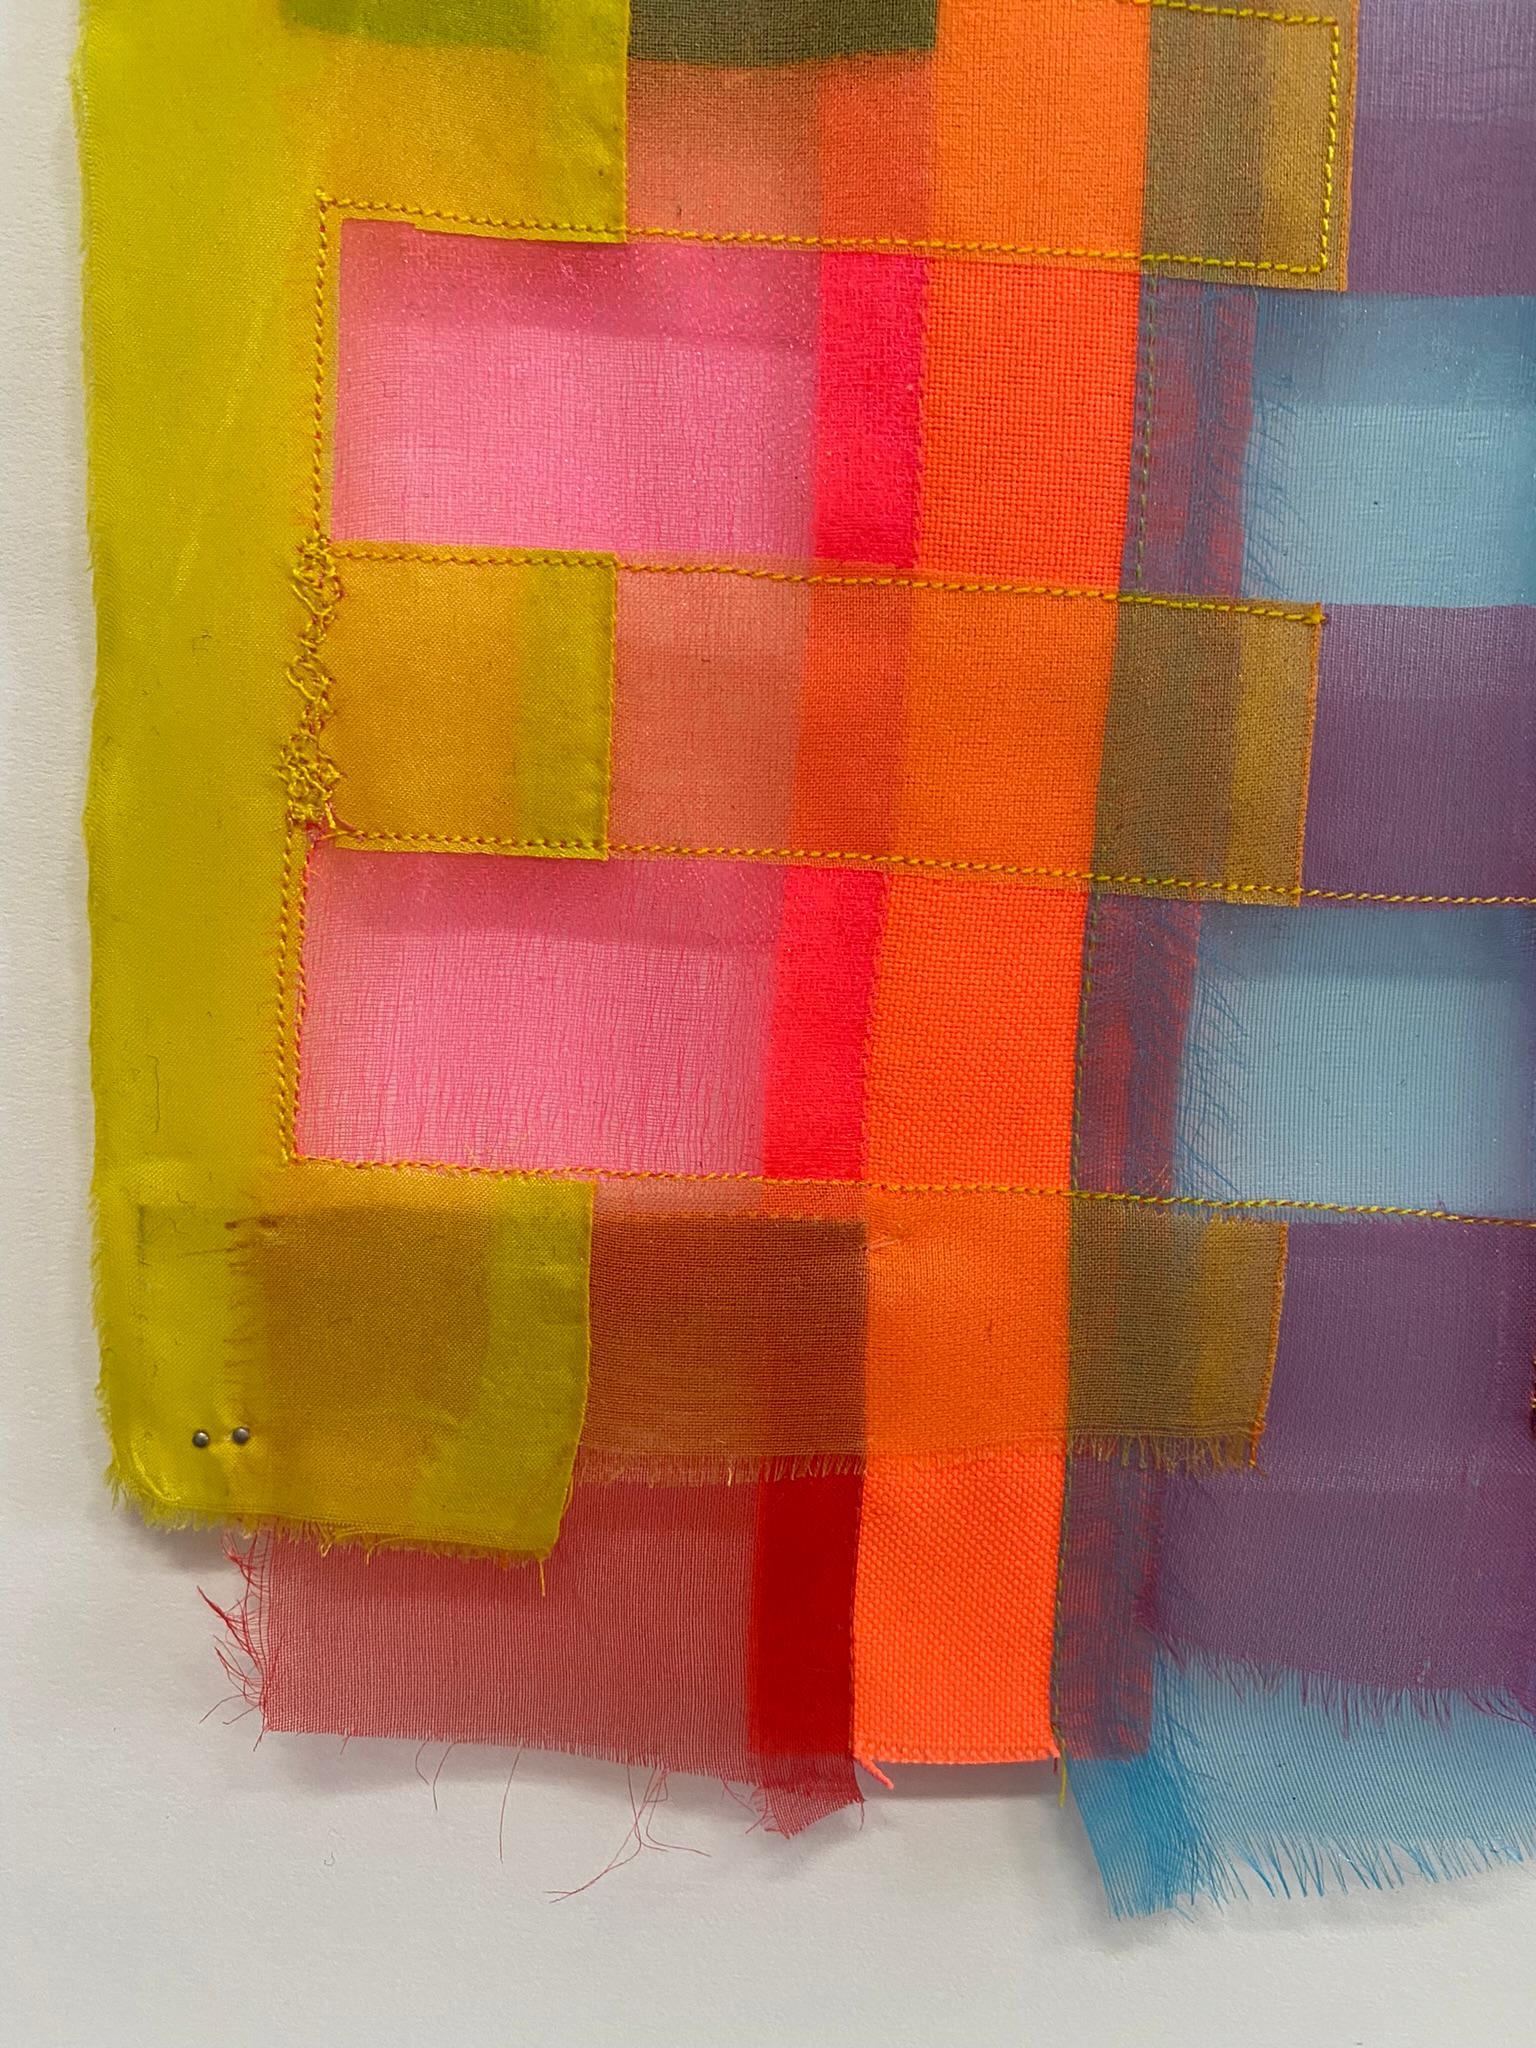 Untitled (0382), colorful abstract fabric sculpture 3